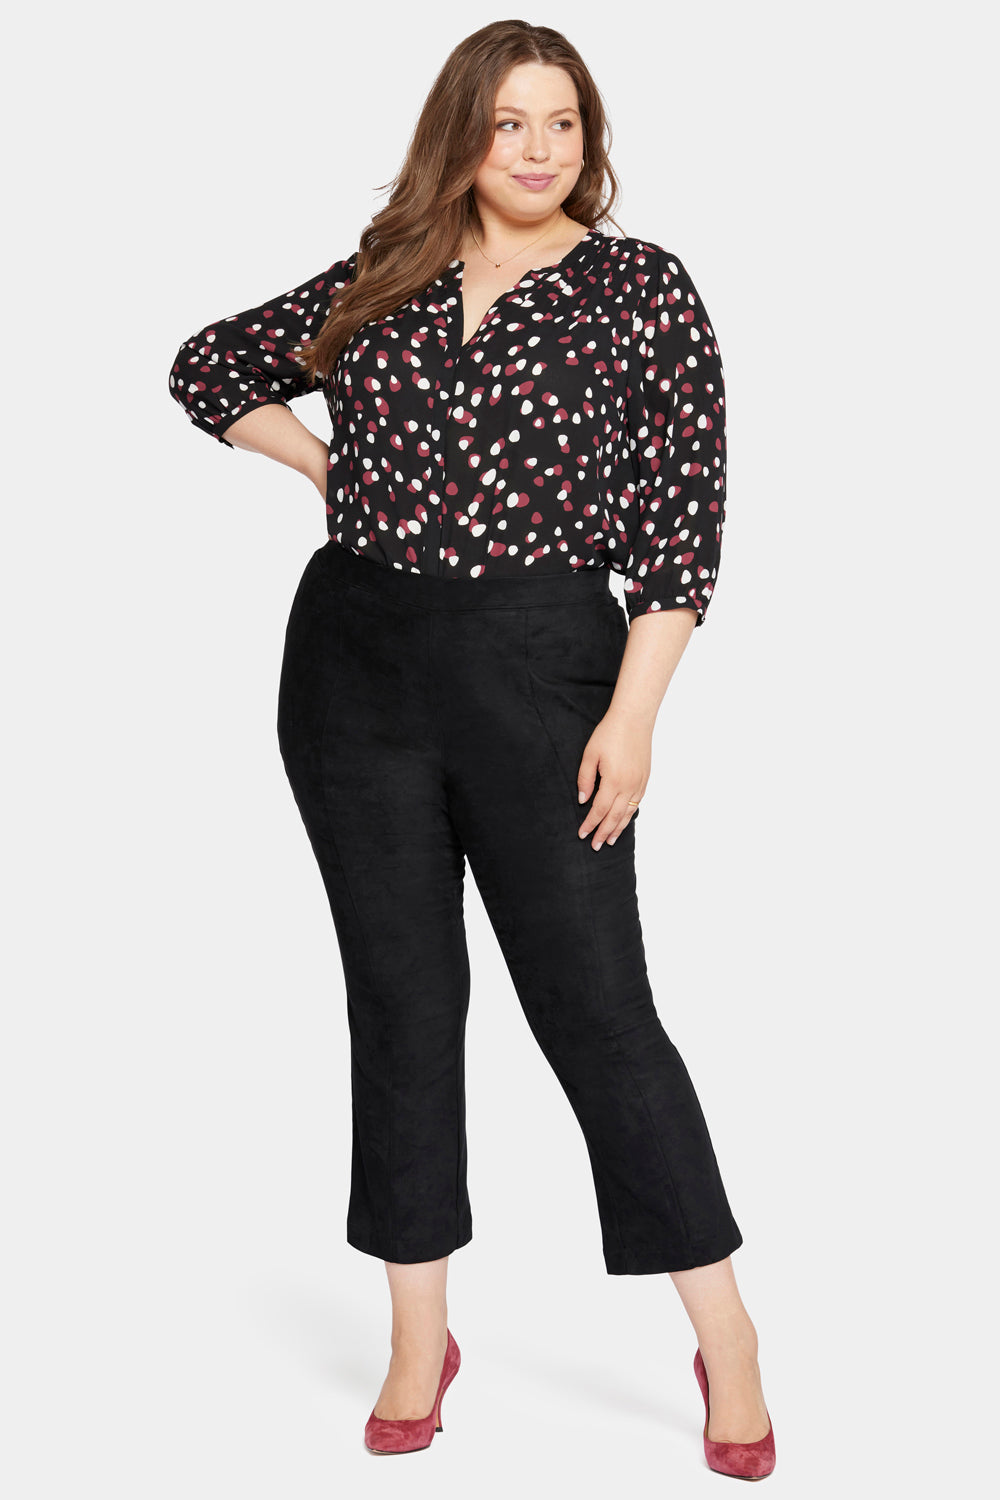 NYDJ Slim Bootcut Pull-On Pants In Plus Size In Stretch Faux Suede - Black